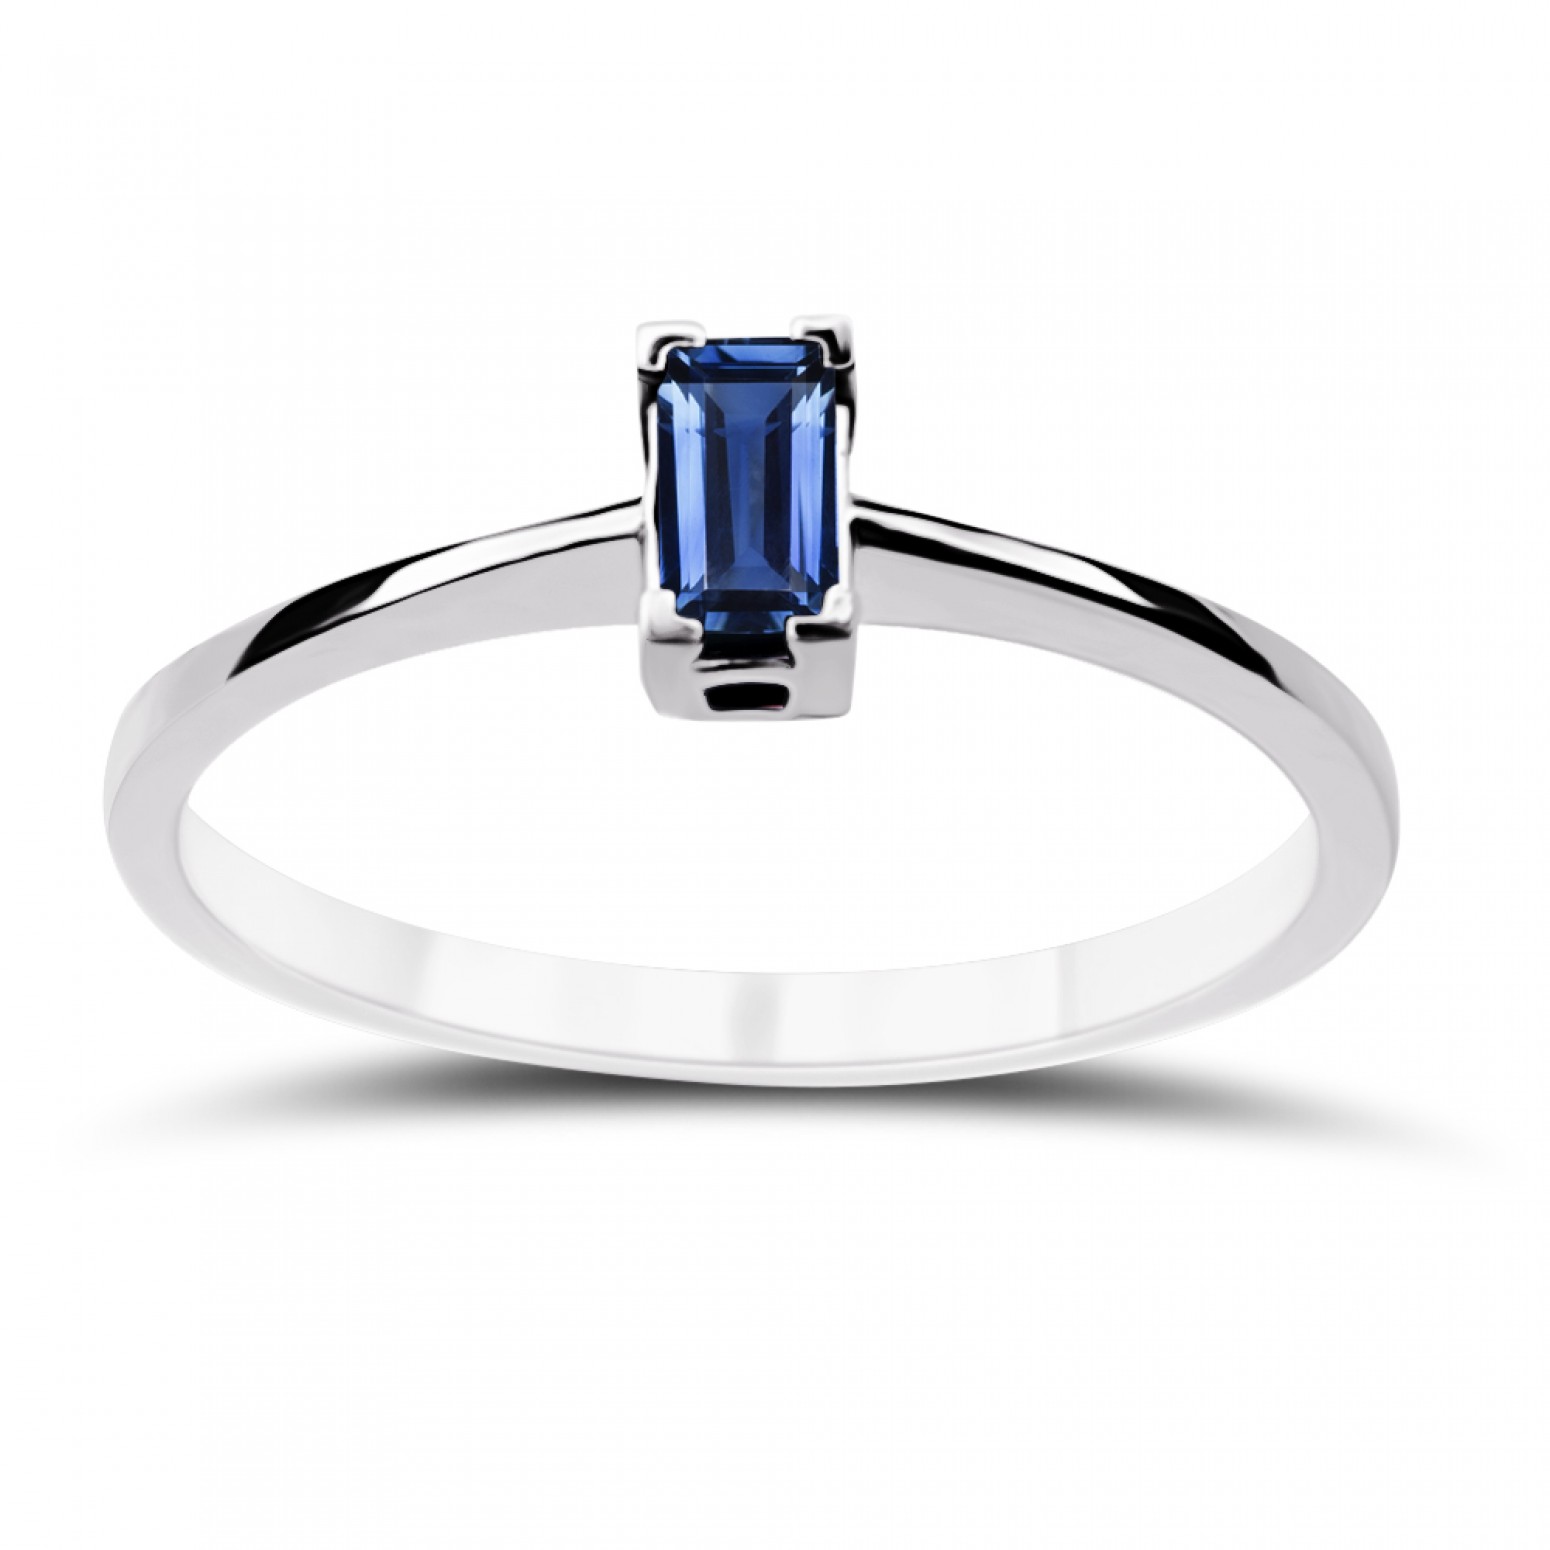 Solitaire ring 18K white gold with sapphire 0.25ct, da3690 ENGAGEMENT RINGS Κοσμηματα - chrilia.gr